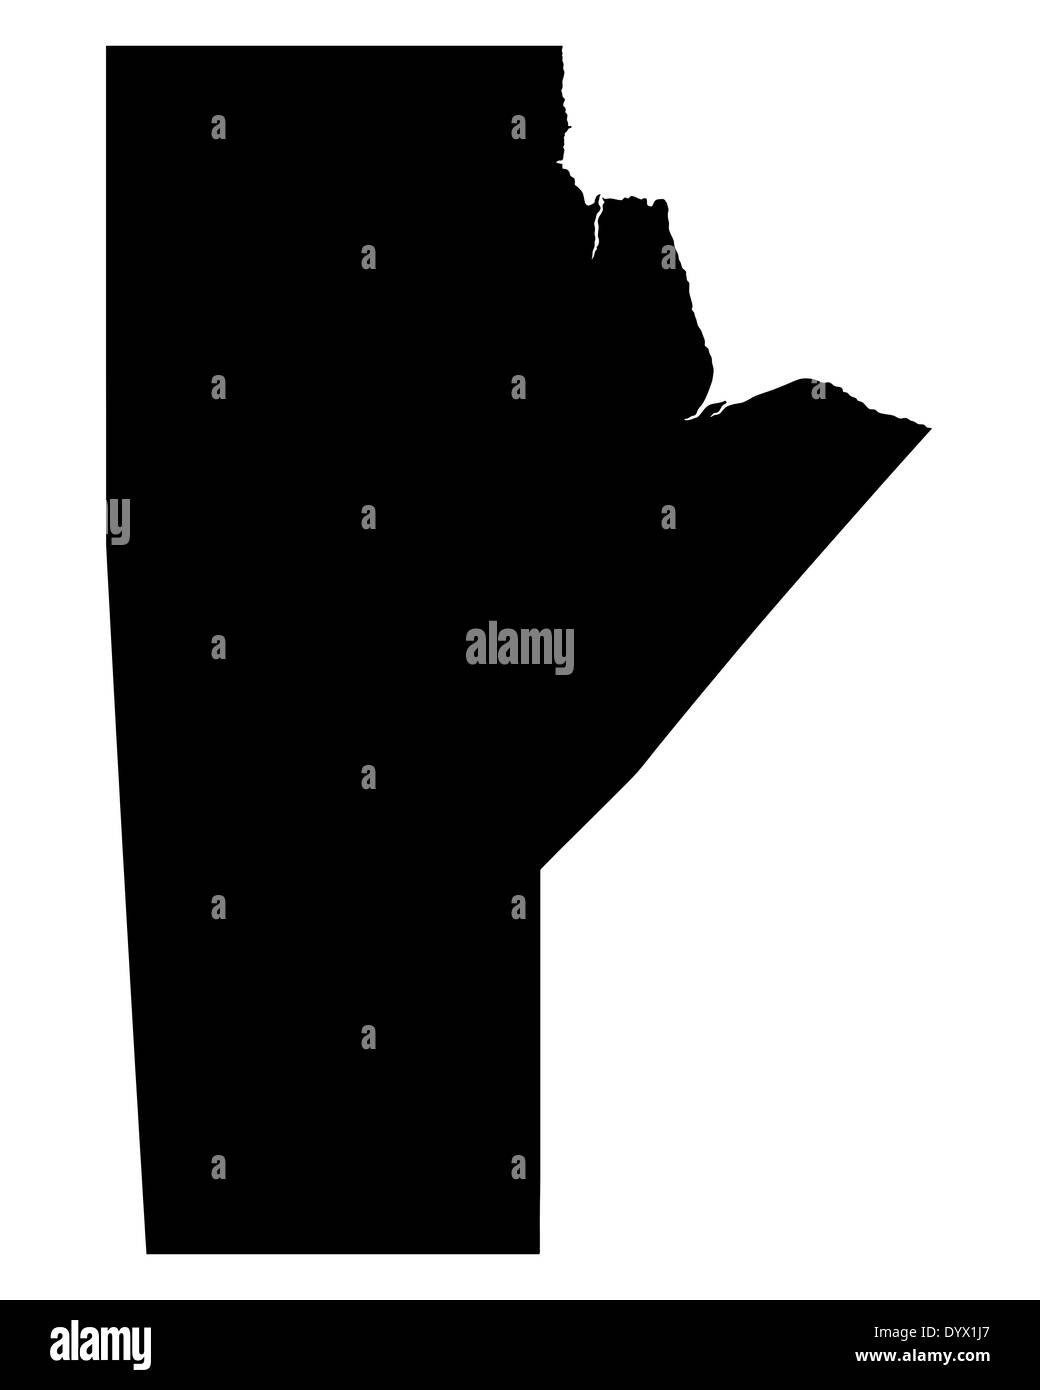 Manitoba province map Black and White Stock Photos & Images - Alamy